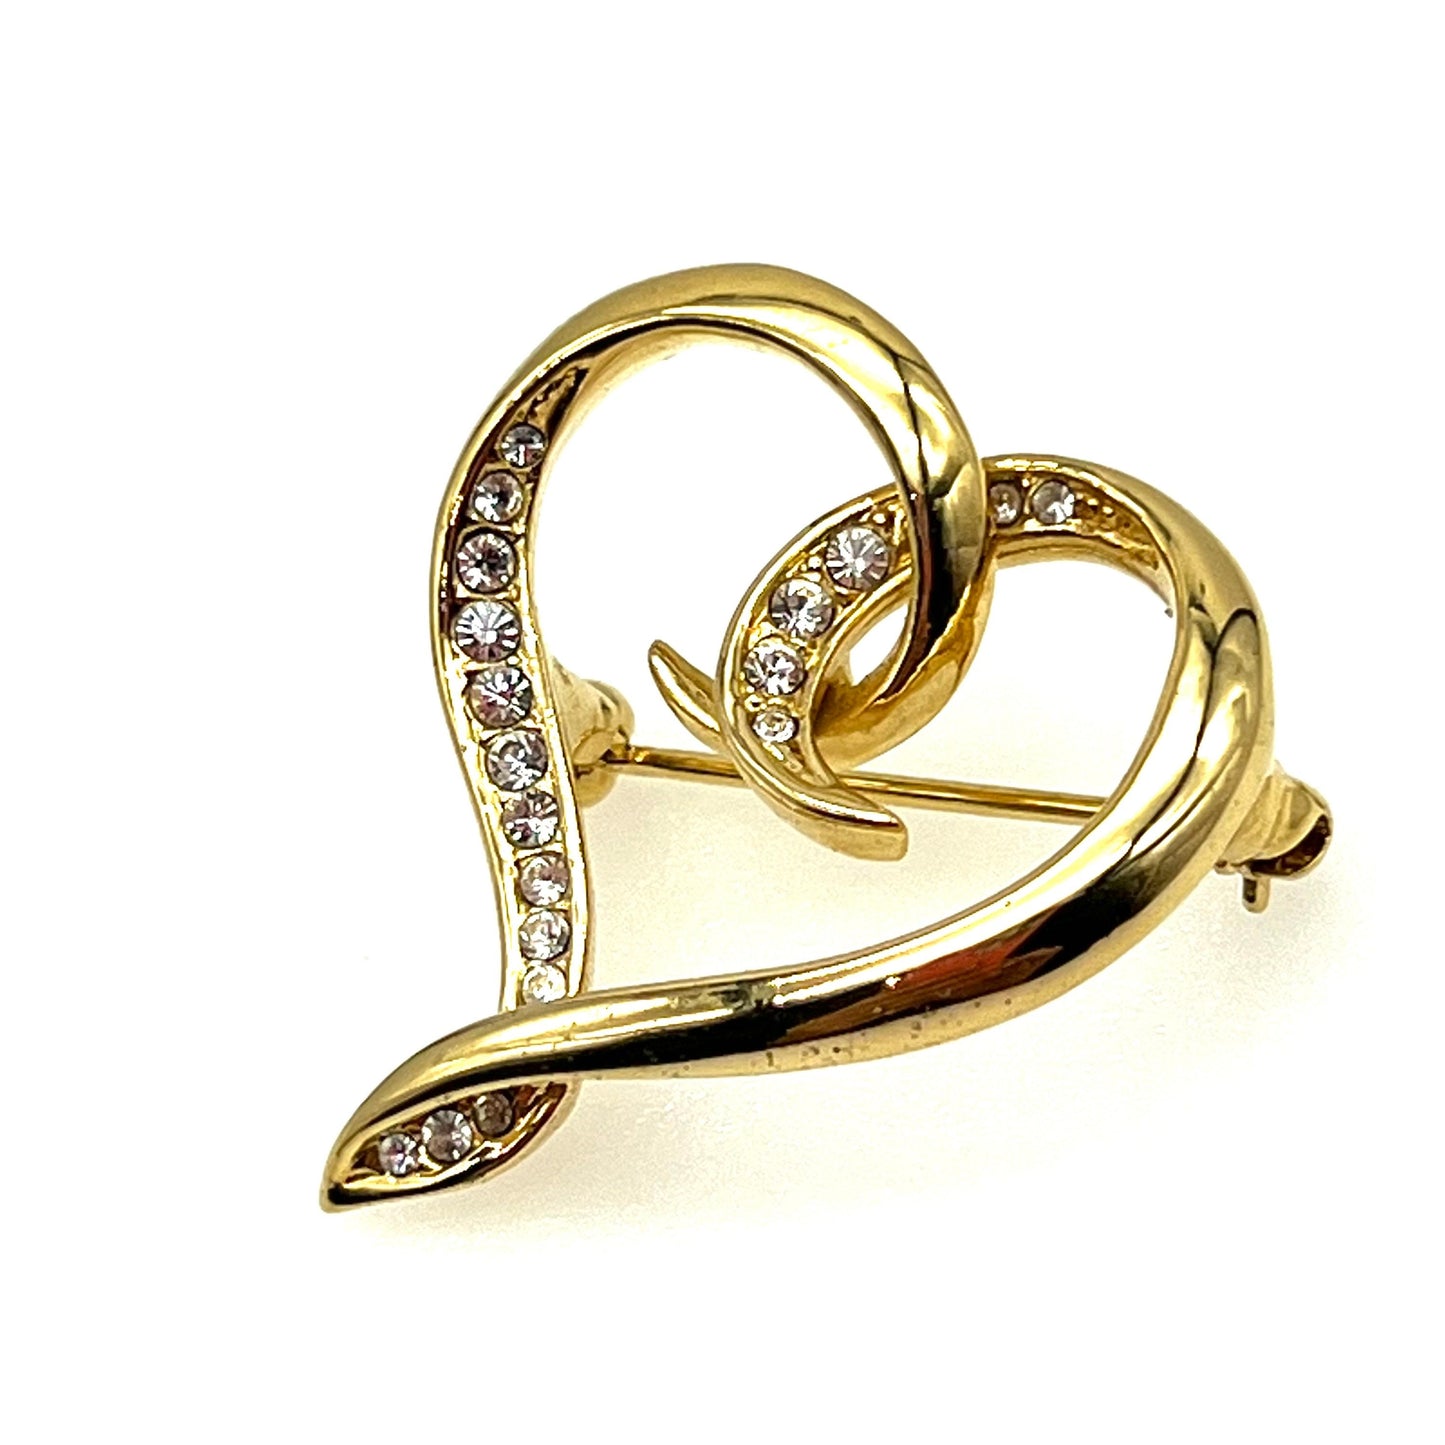 Attwood and Sawyer 22ct Gold Plated Open Heart Brooch